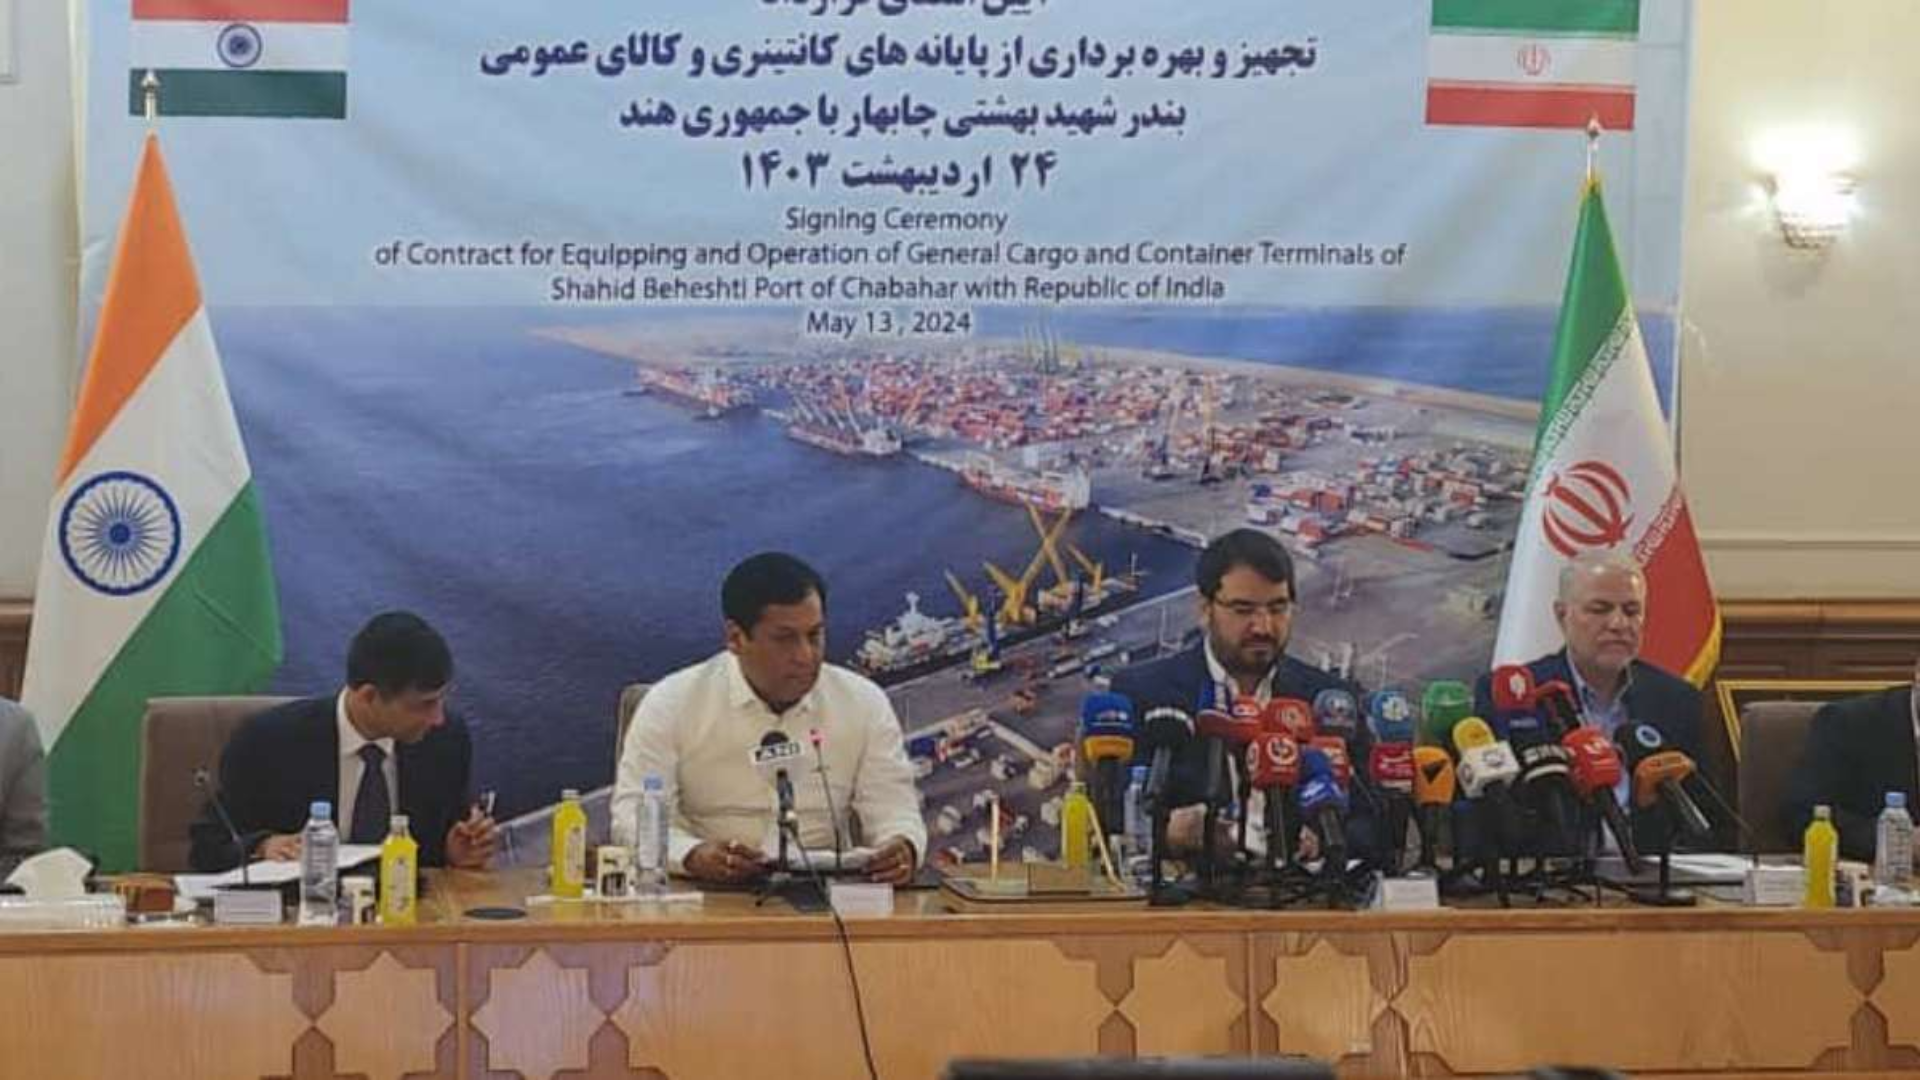 India Signs 10-Year Chabahar Port Agreement With Iran: Here’s What You Need To Know